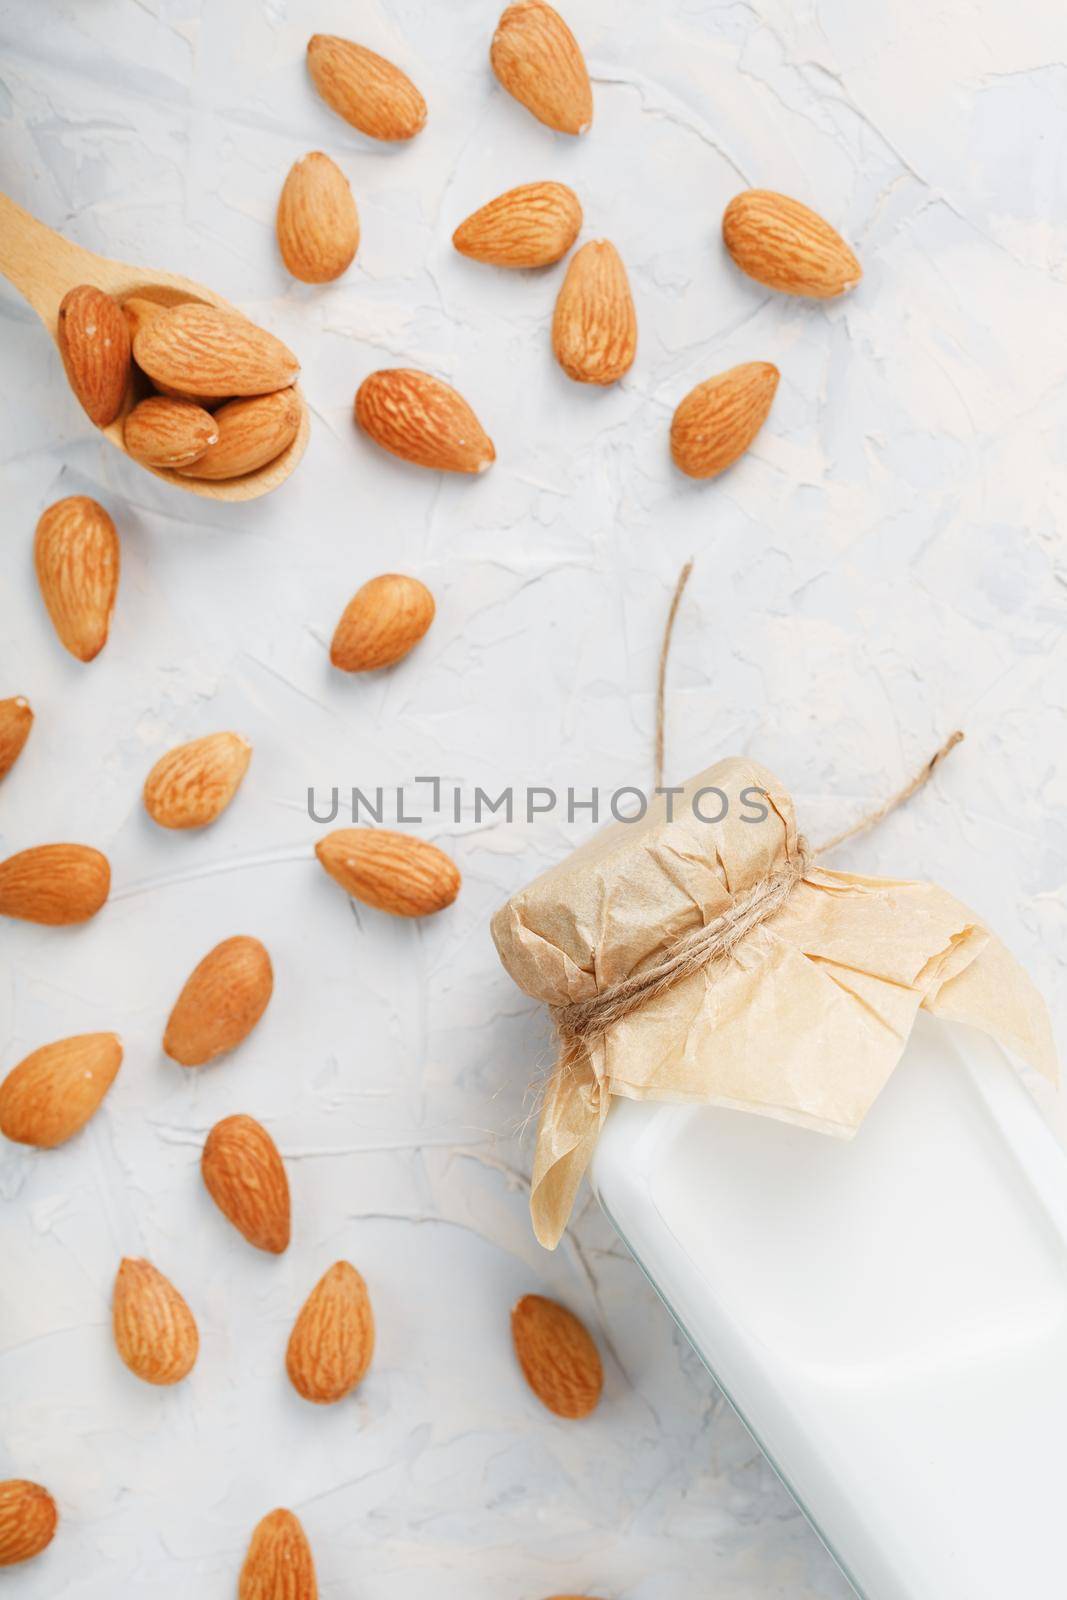 Almond milk in a glass bottle on a light background with a scattering of seed kernels and a wooden spoon. by AlexGrec